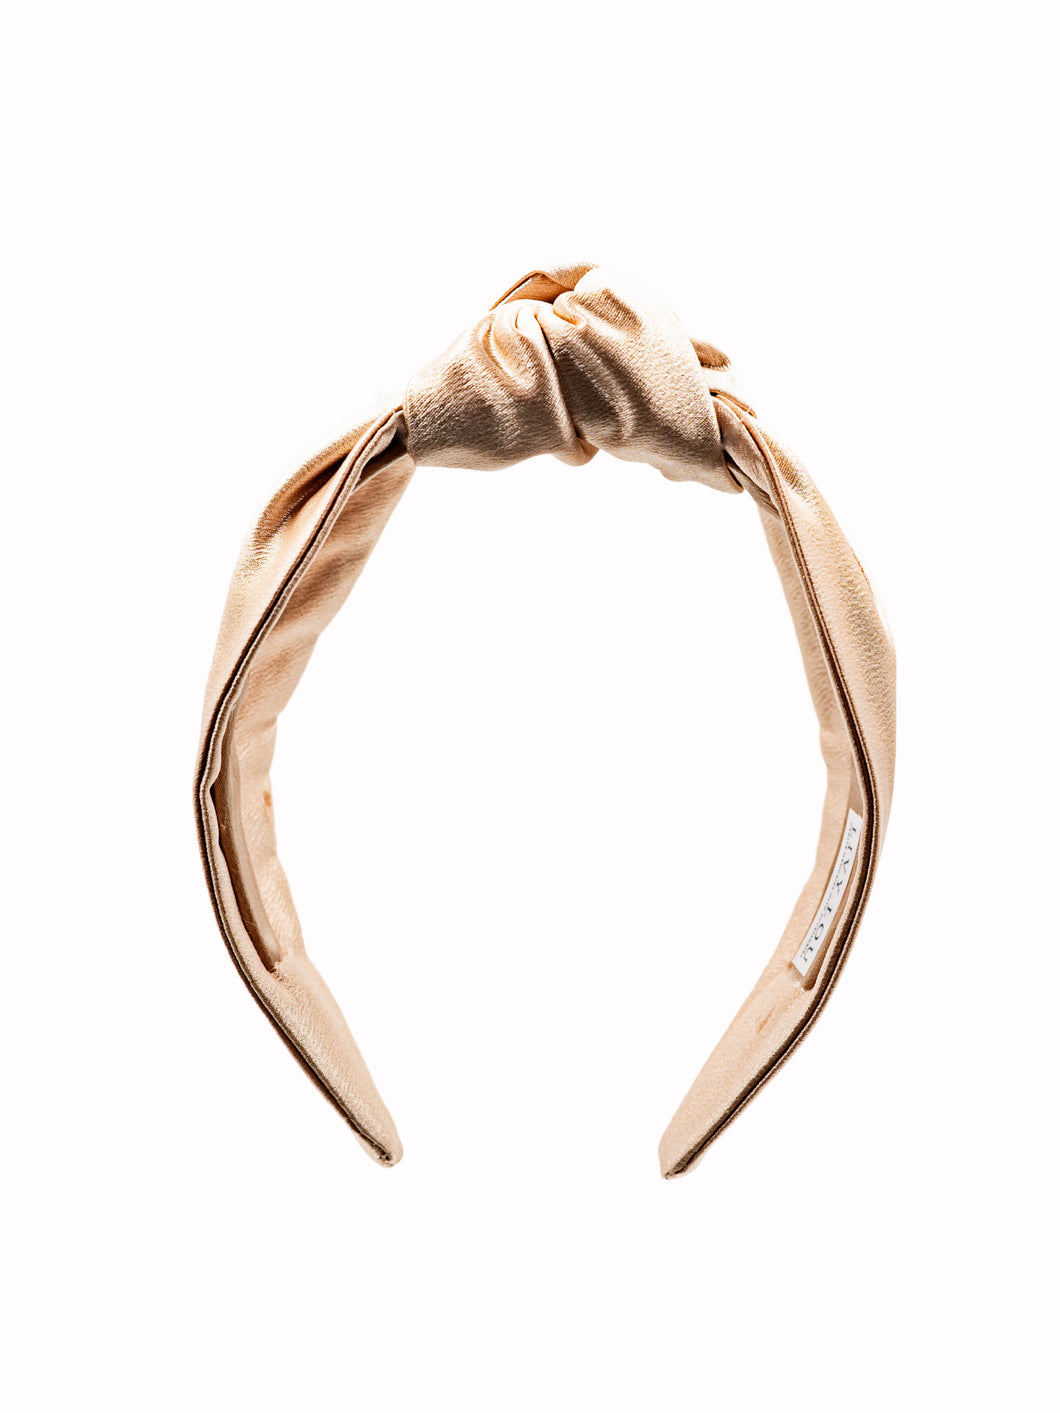 Reese Gold Satin Knotted Headband